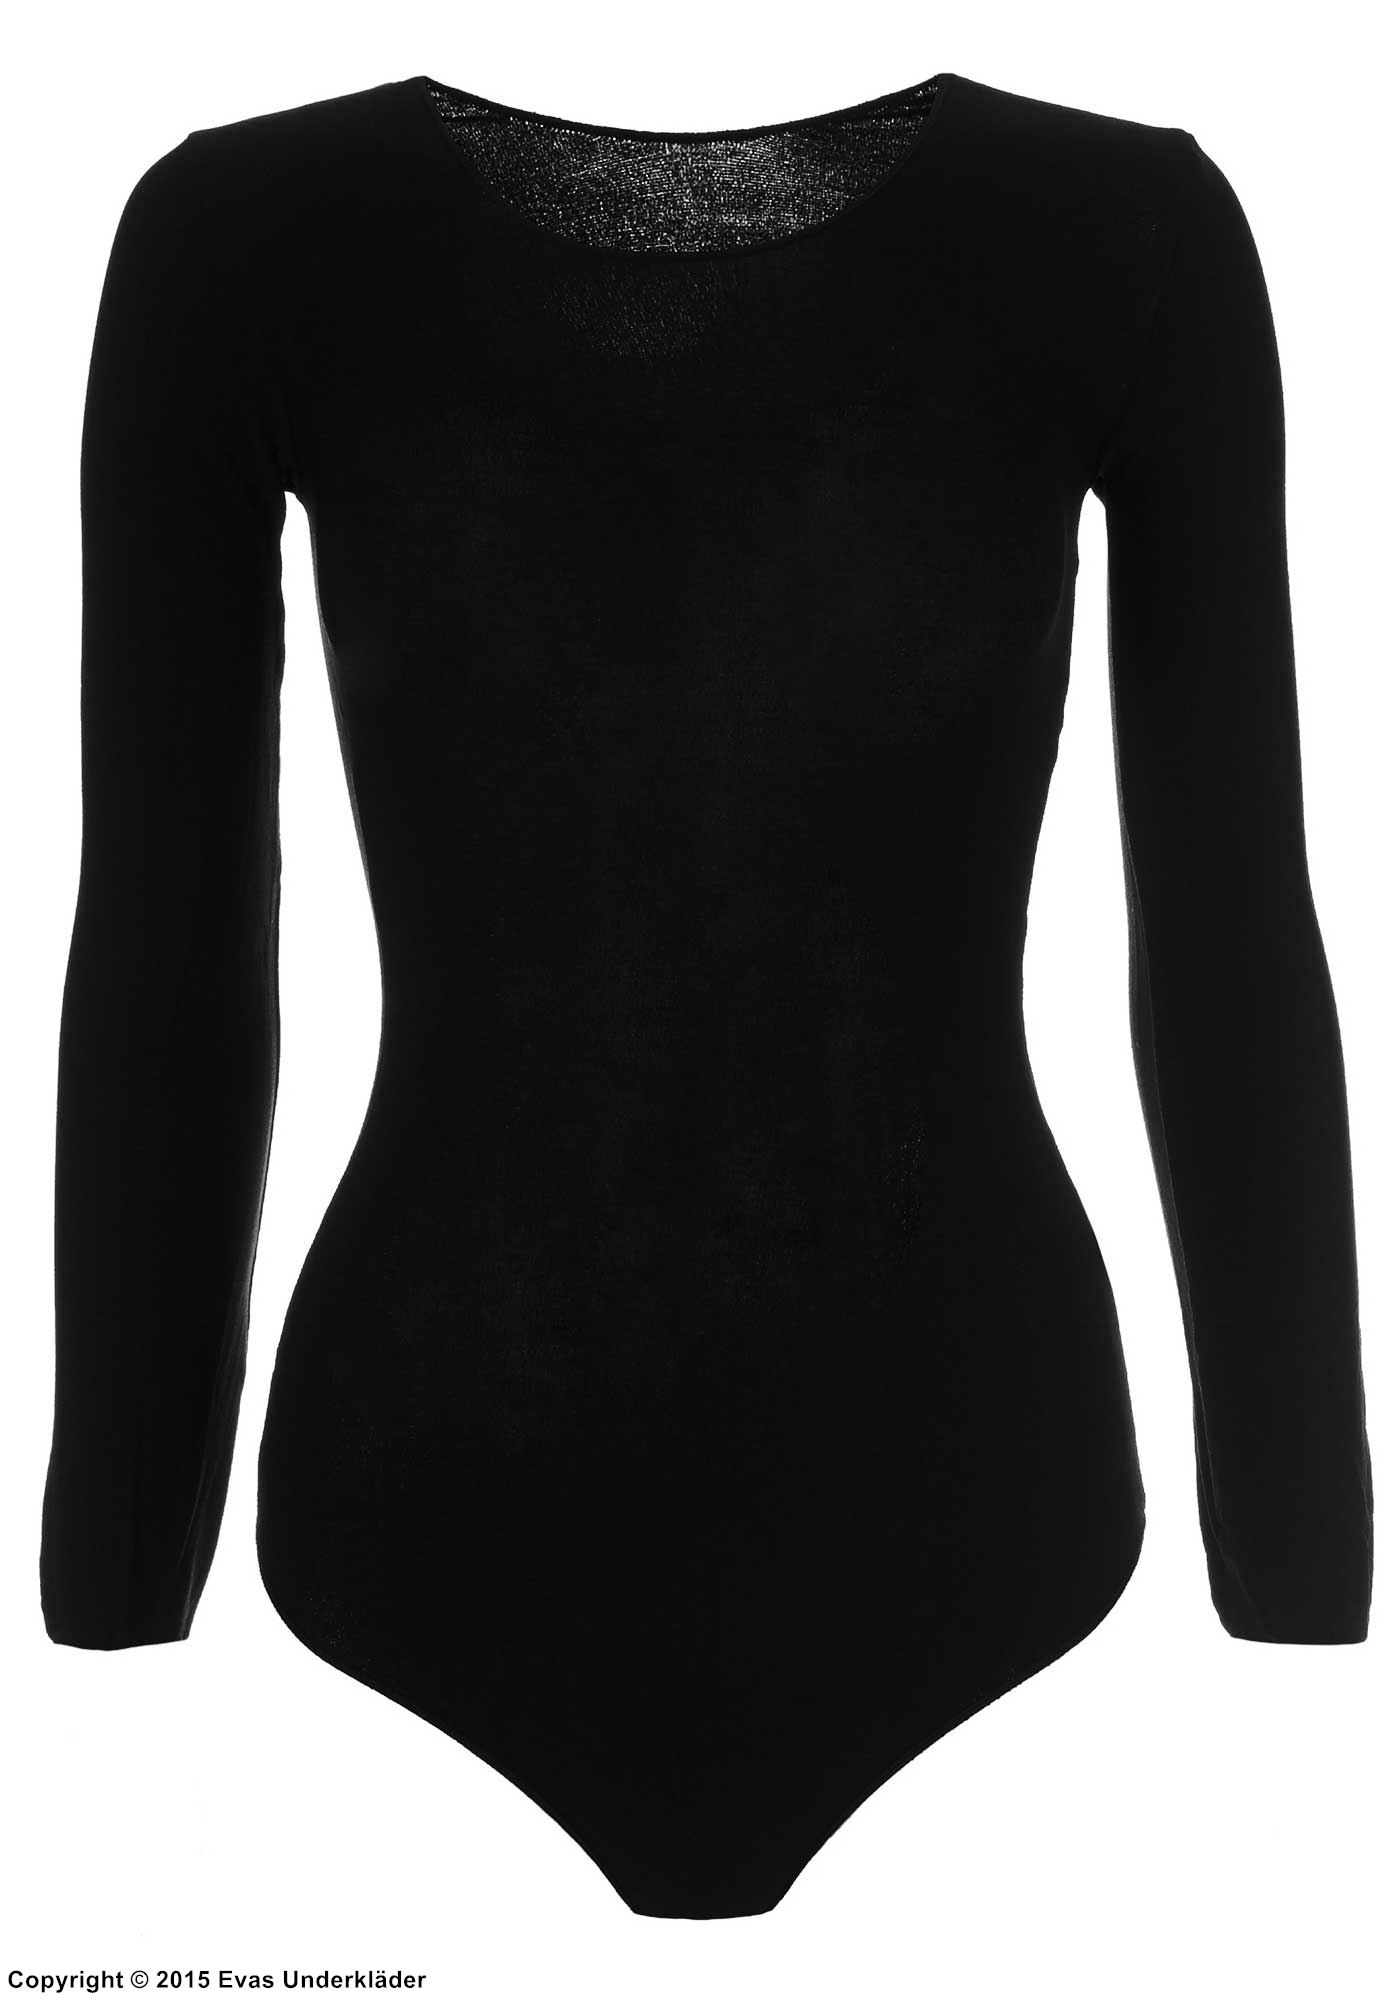 Classic bodysuit, long sleeves, scoop neck, without pattern